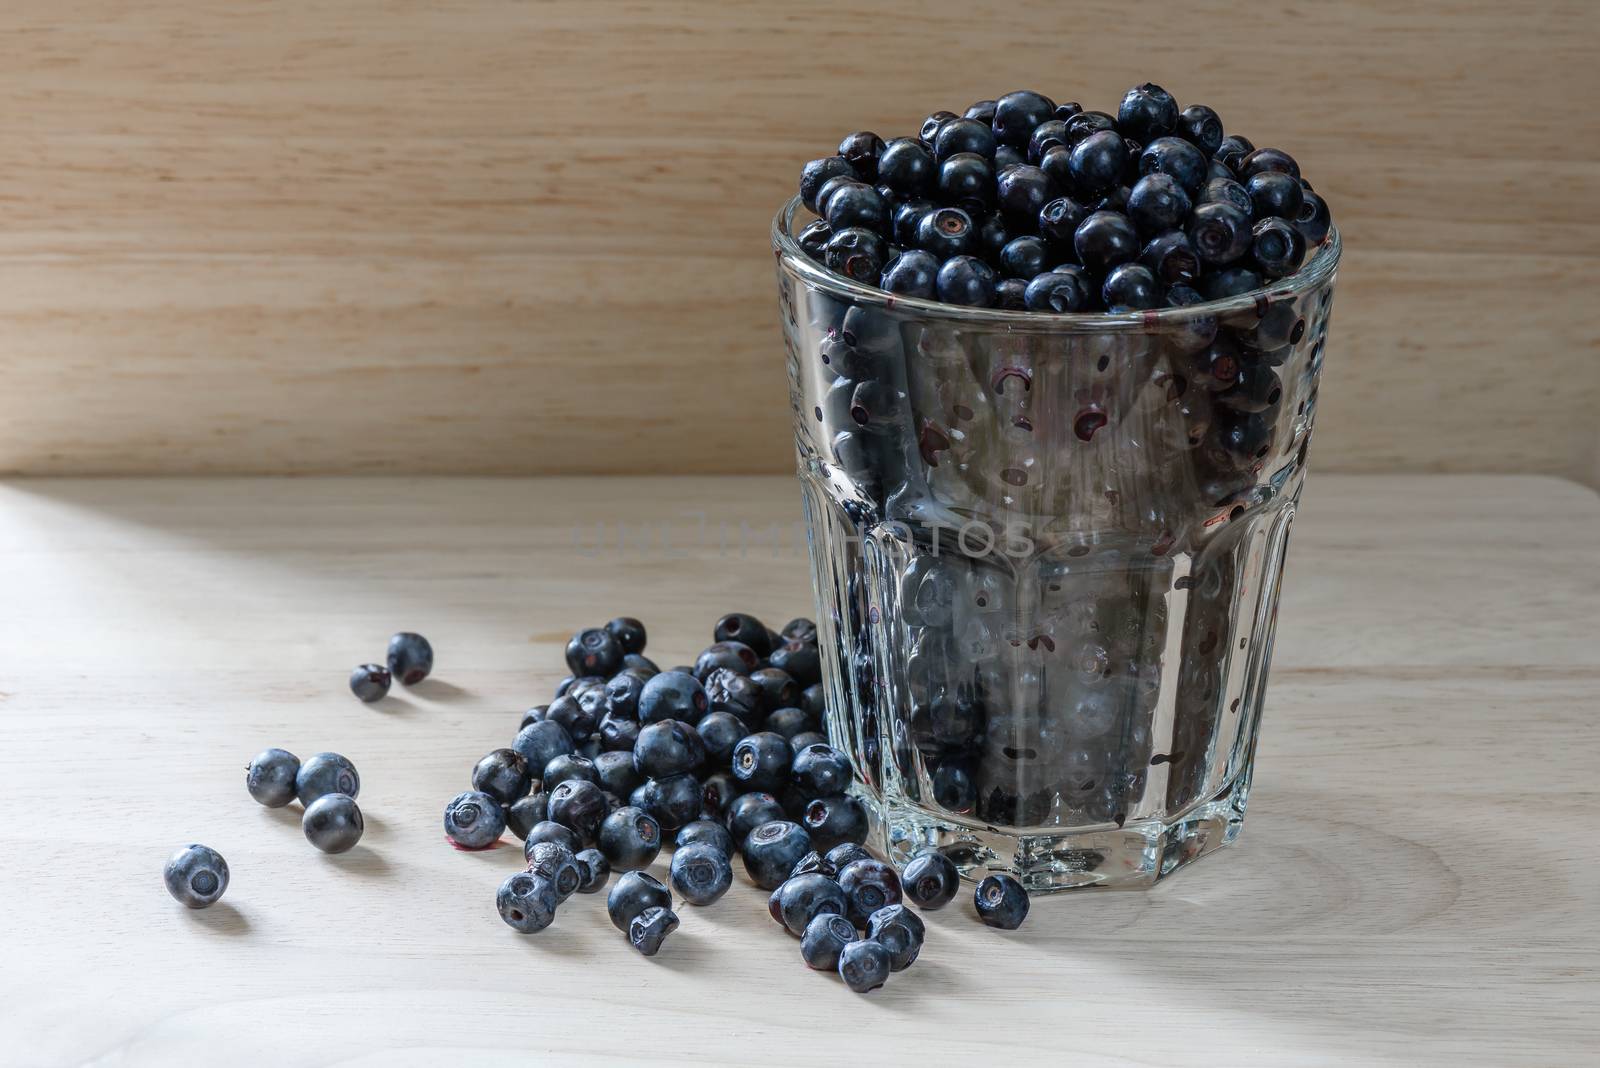 Blueberries in a glass with scattered berries. Good addition for your breakfast